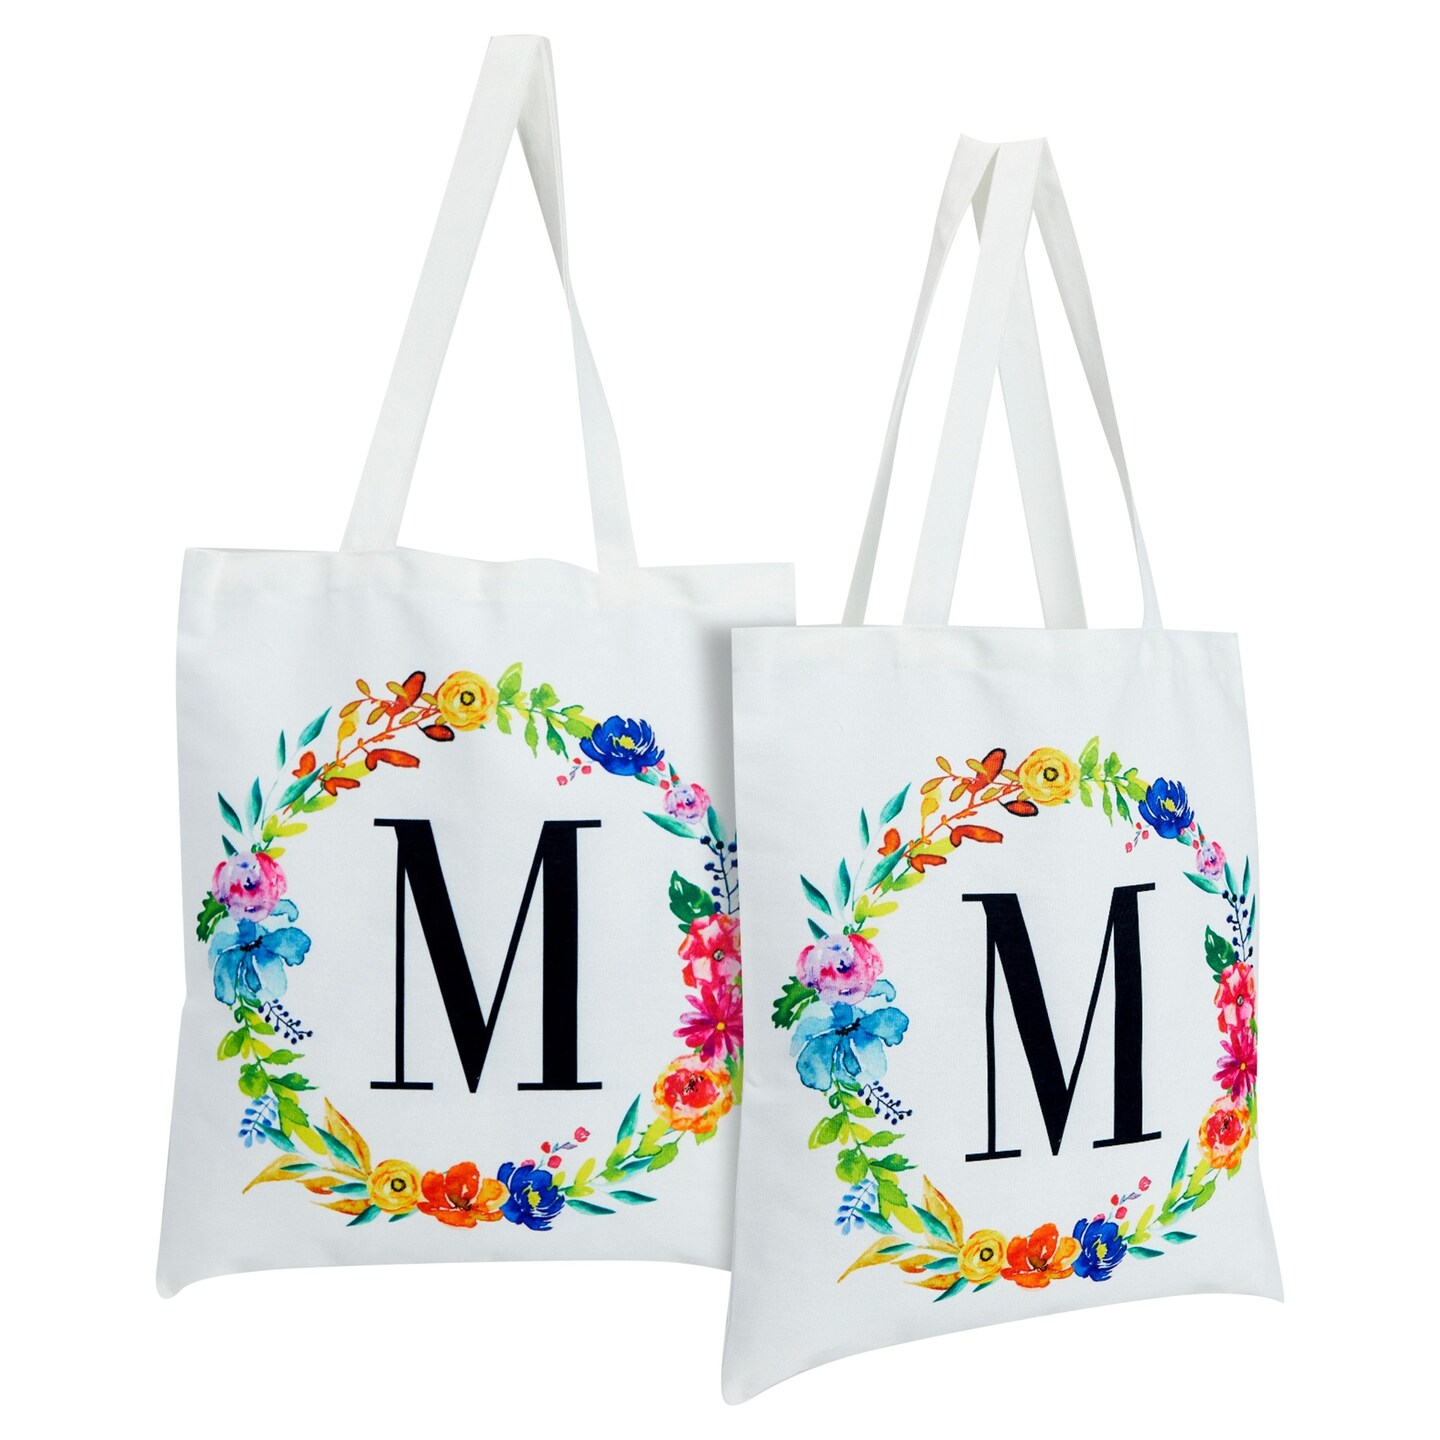 ElegantPark Monogrammed Gifts for Women Personalized Tote Bags Monogram A  Initial Bag Totes for Wedding Bride Bridesmaid Gifts Birthday Gifts Teacher  Gifts Bag with Pocket Black Canvas : Amazon.in: Bags, Wallets and